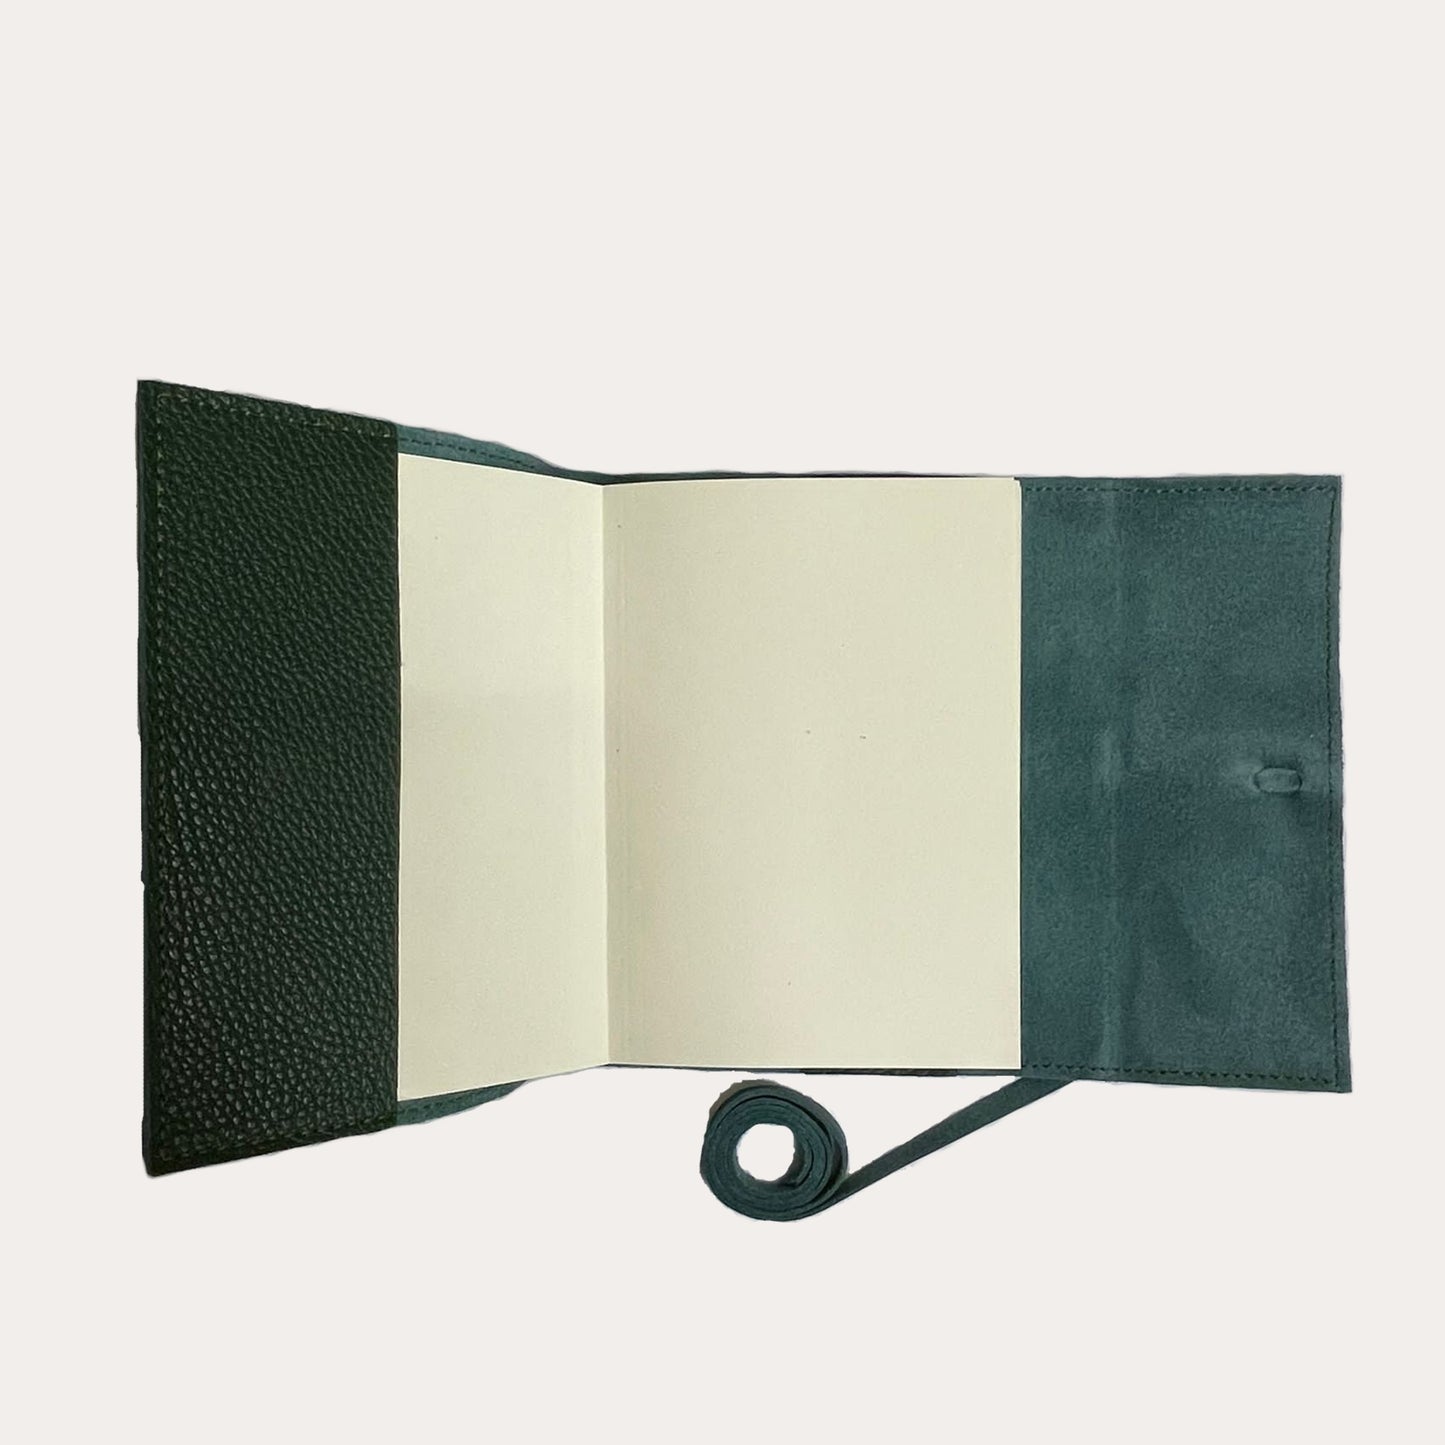 Large Green Refillable Leather Bound Notebook